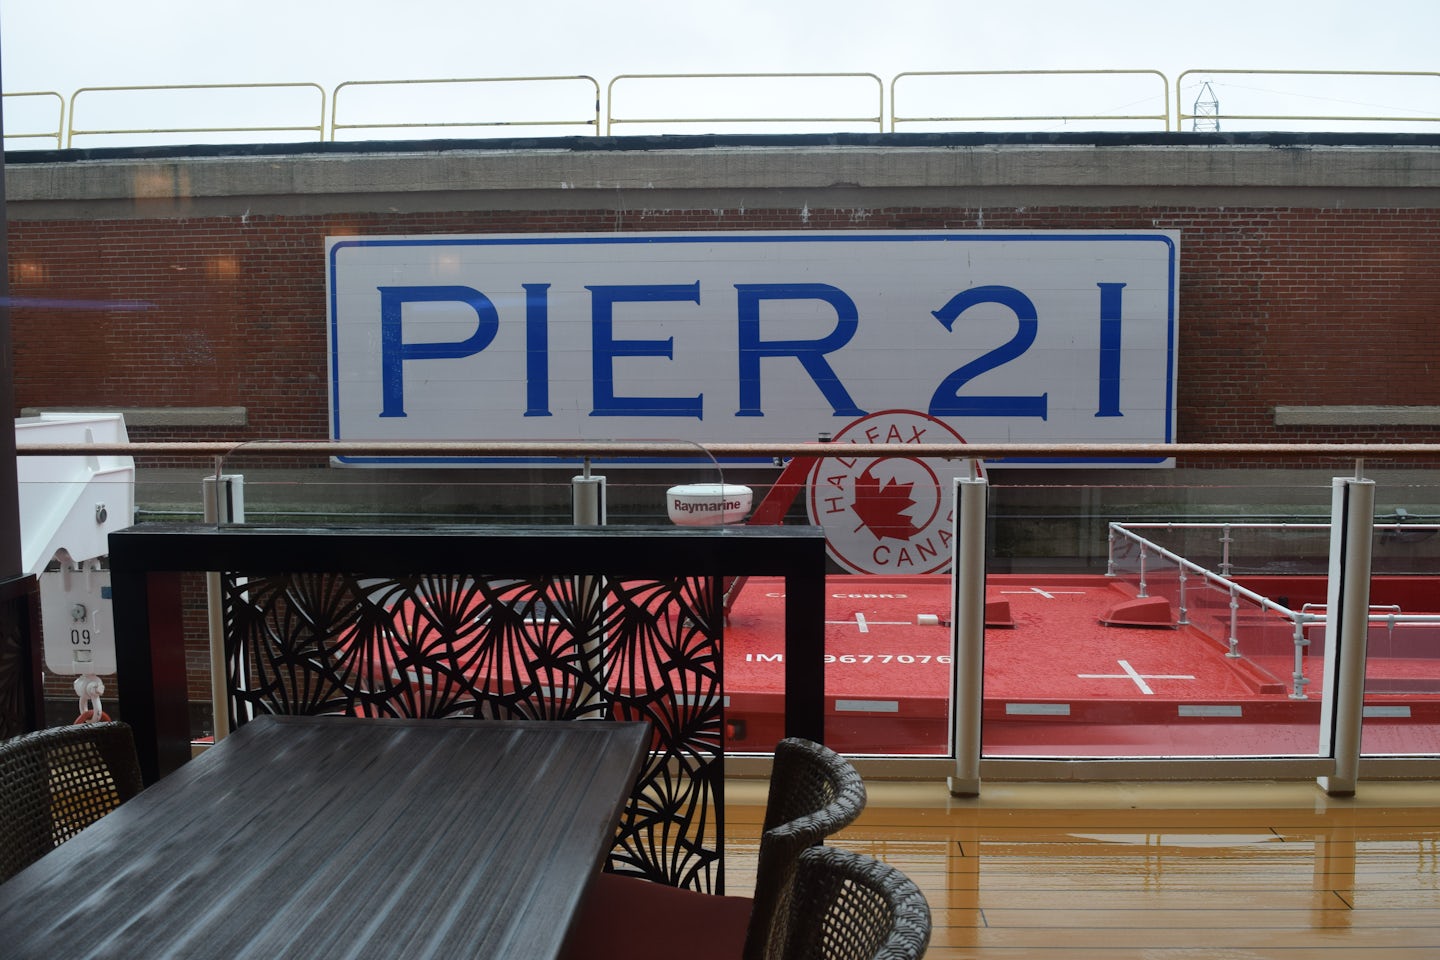 This is a pier in Canada where there is shopping and goodies. In Halifax.